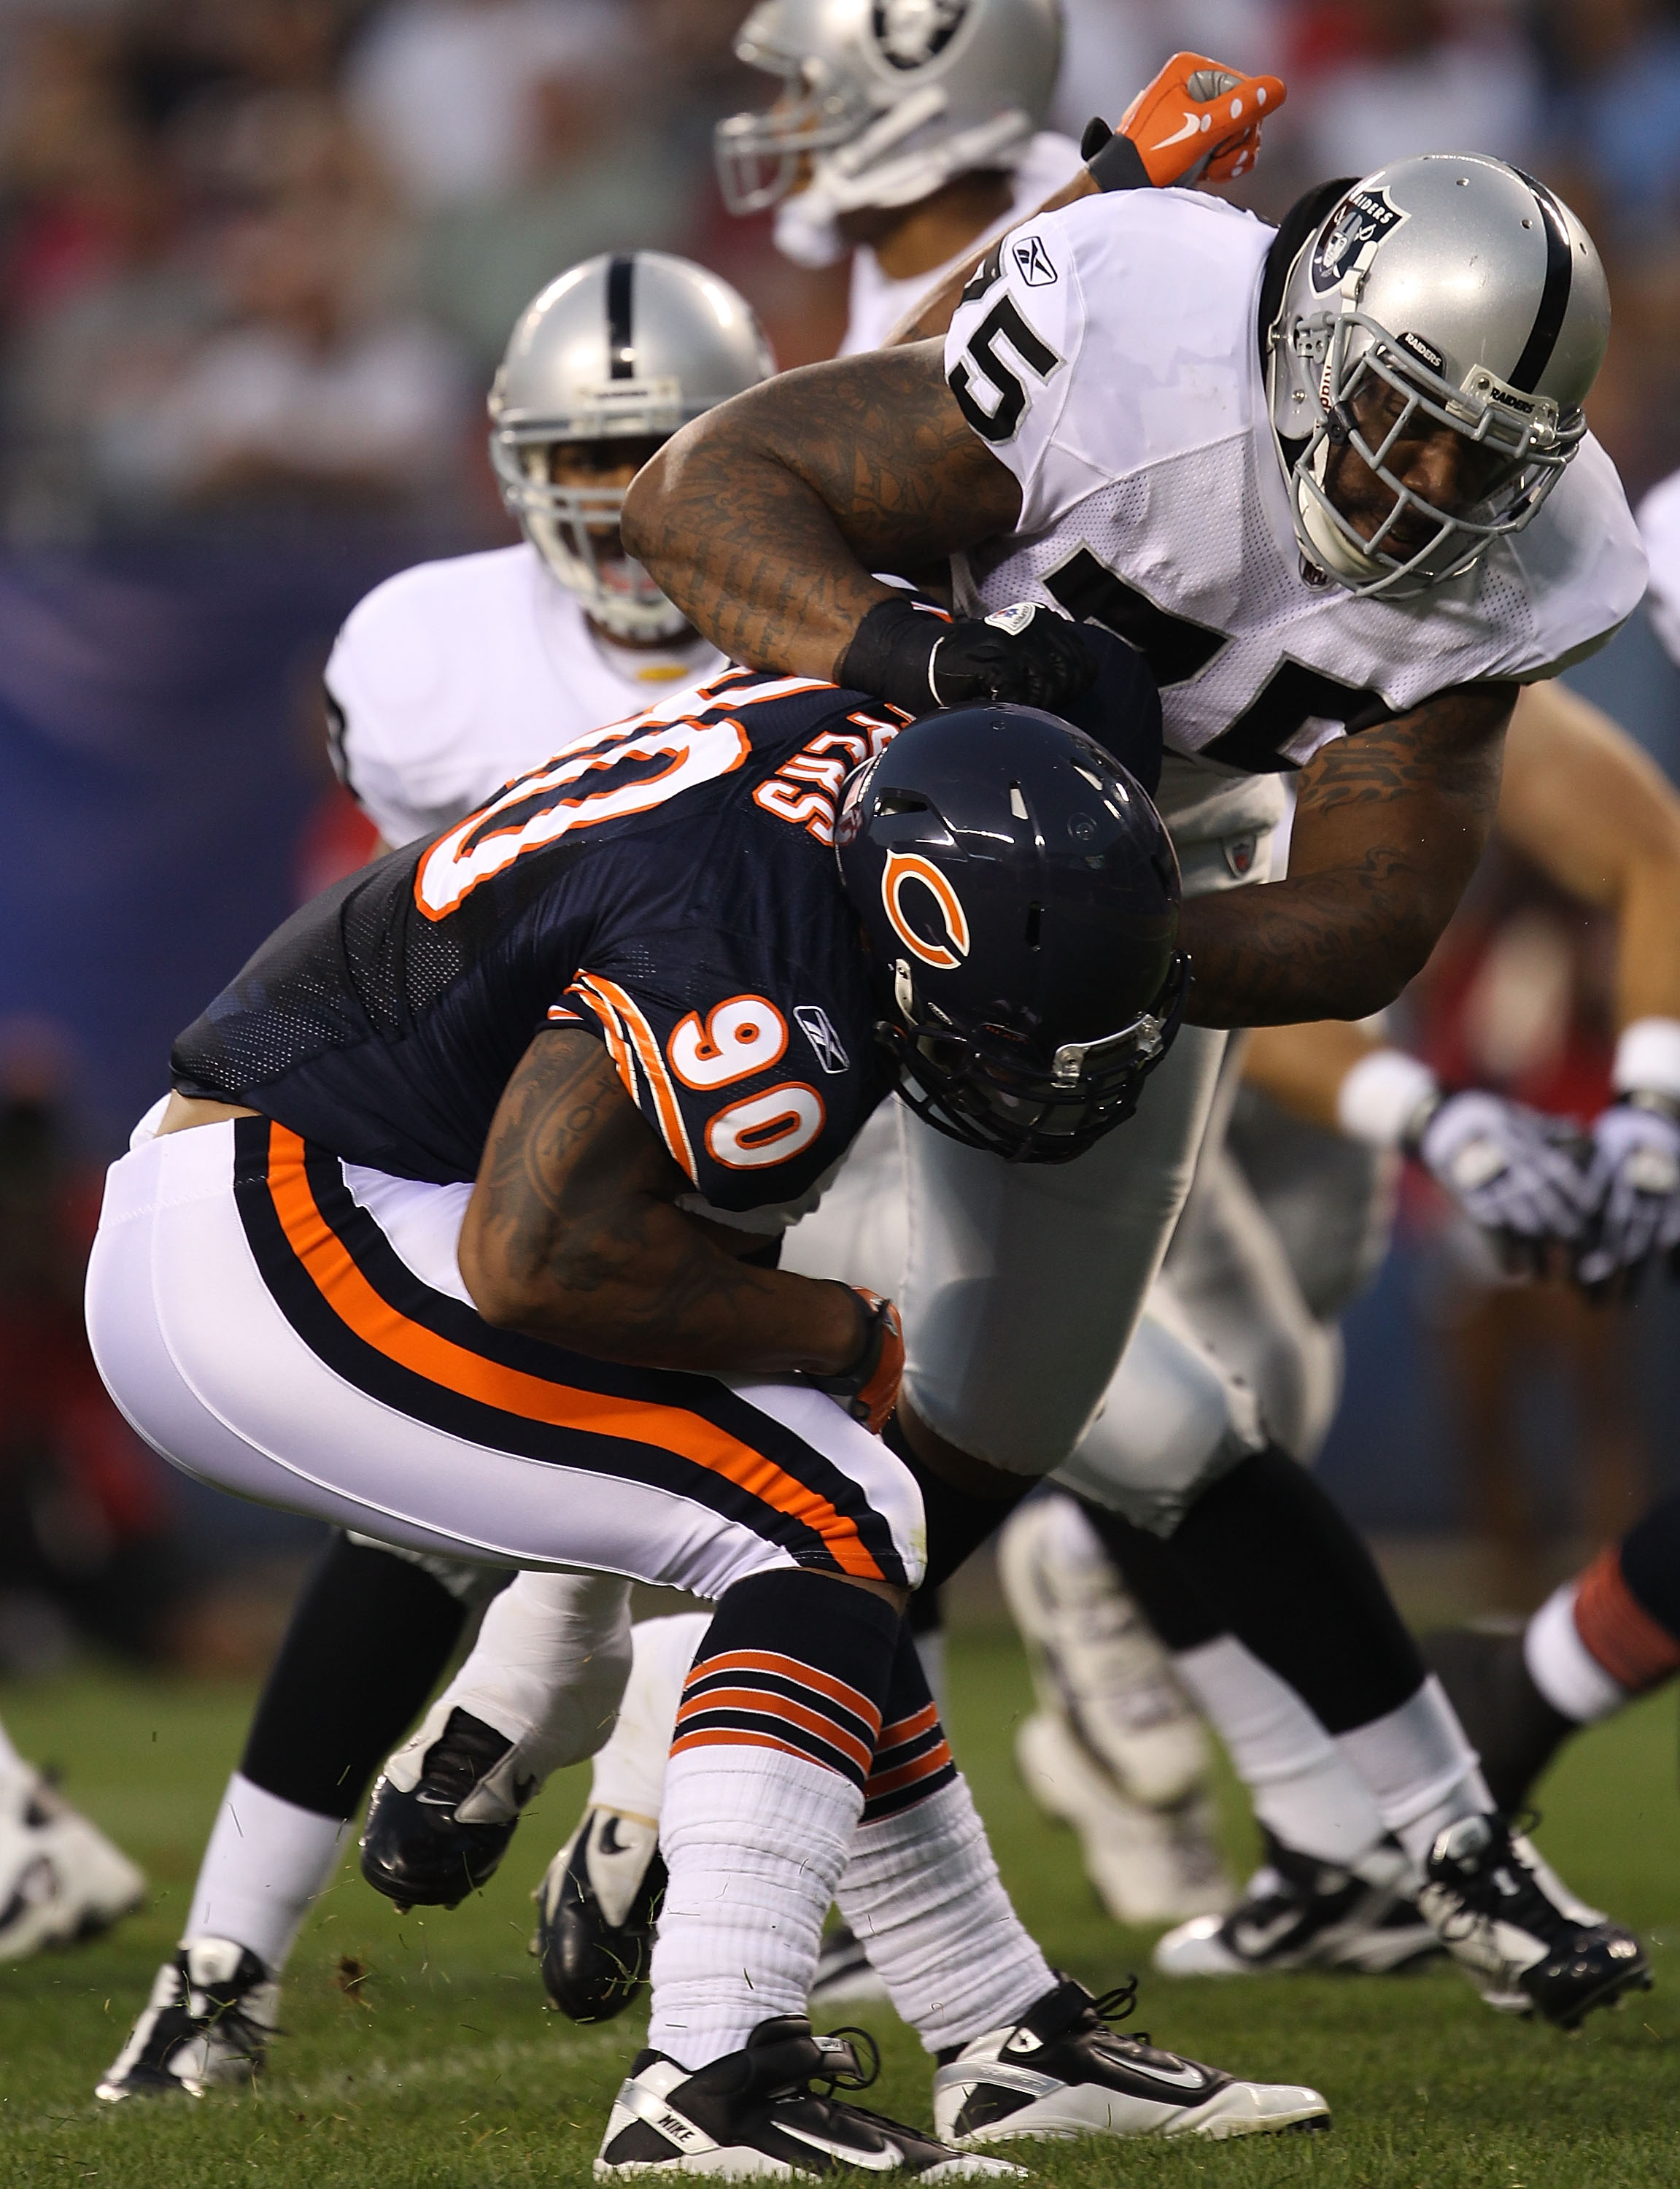 CHICAGO - AUGUST 21: Mario Henderson #75 of the Oakland Raiders blocks Julius Peppers #90 of the Chicago Bears during a preseason game at Soldier Field on August 21, 2010 in Chicago, Illinois. (Photo by Jonathan Daniel/Getty Images)